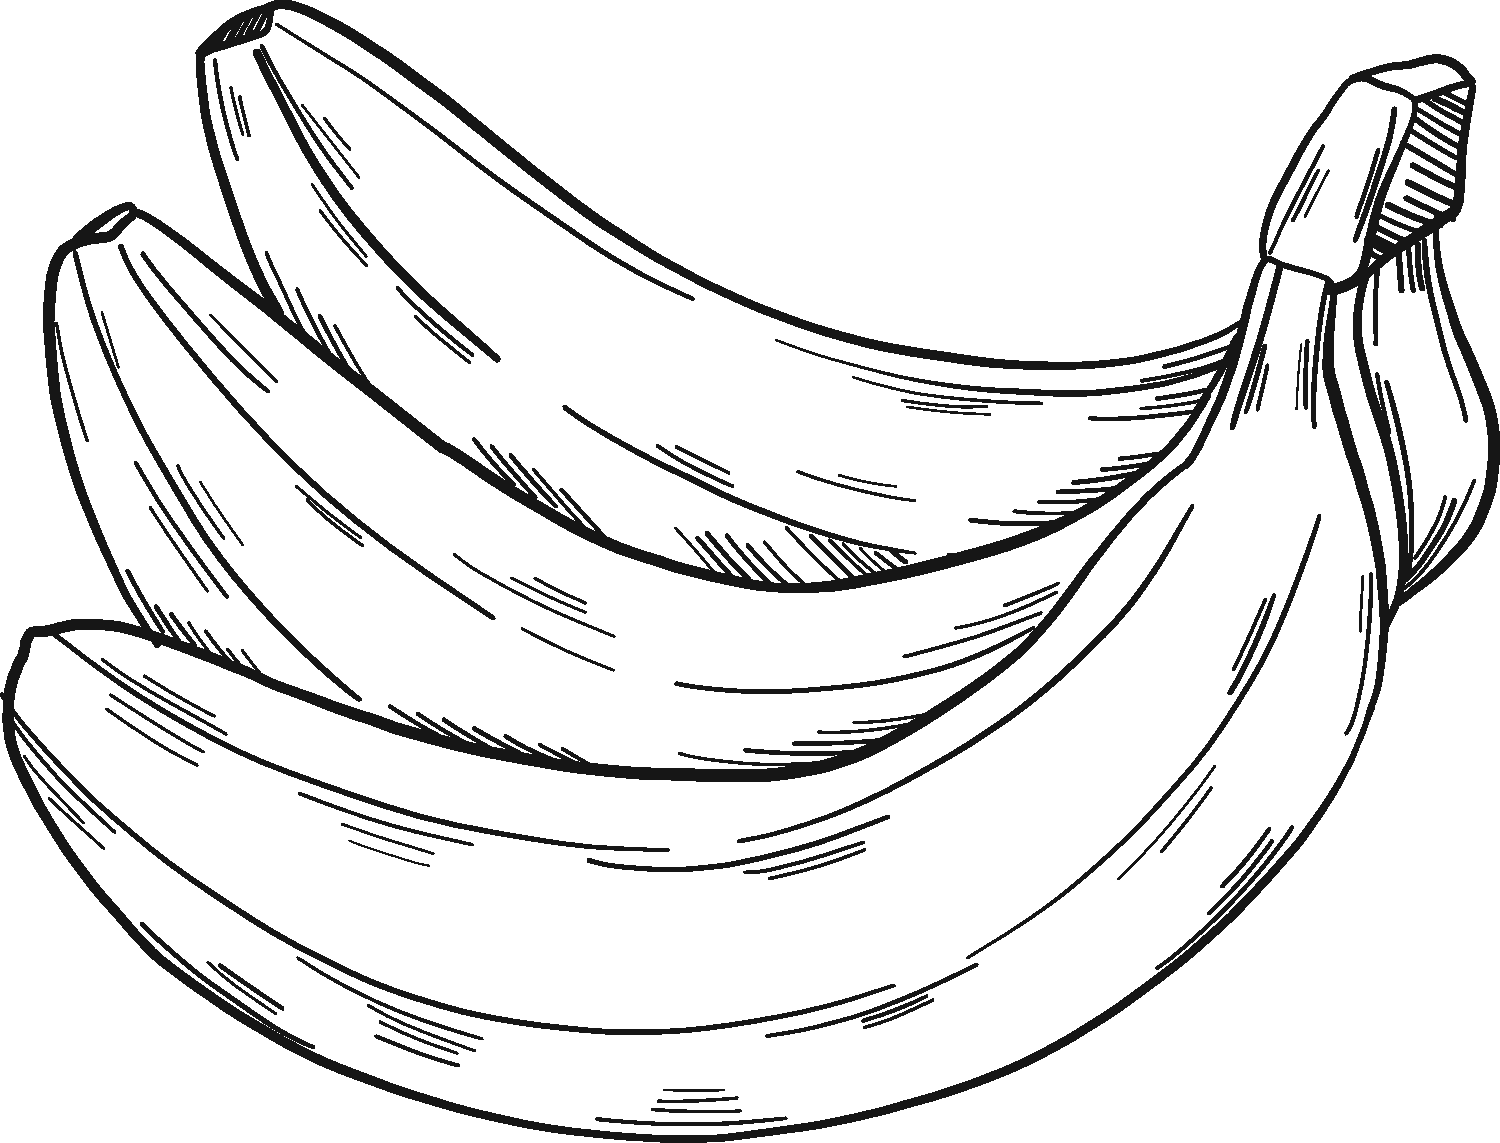 Banana Coloring Page For Monkey Coloring Pages   Coloring Cool